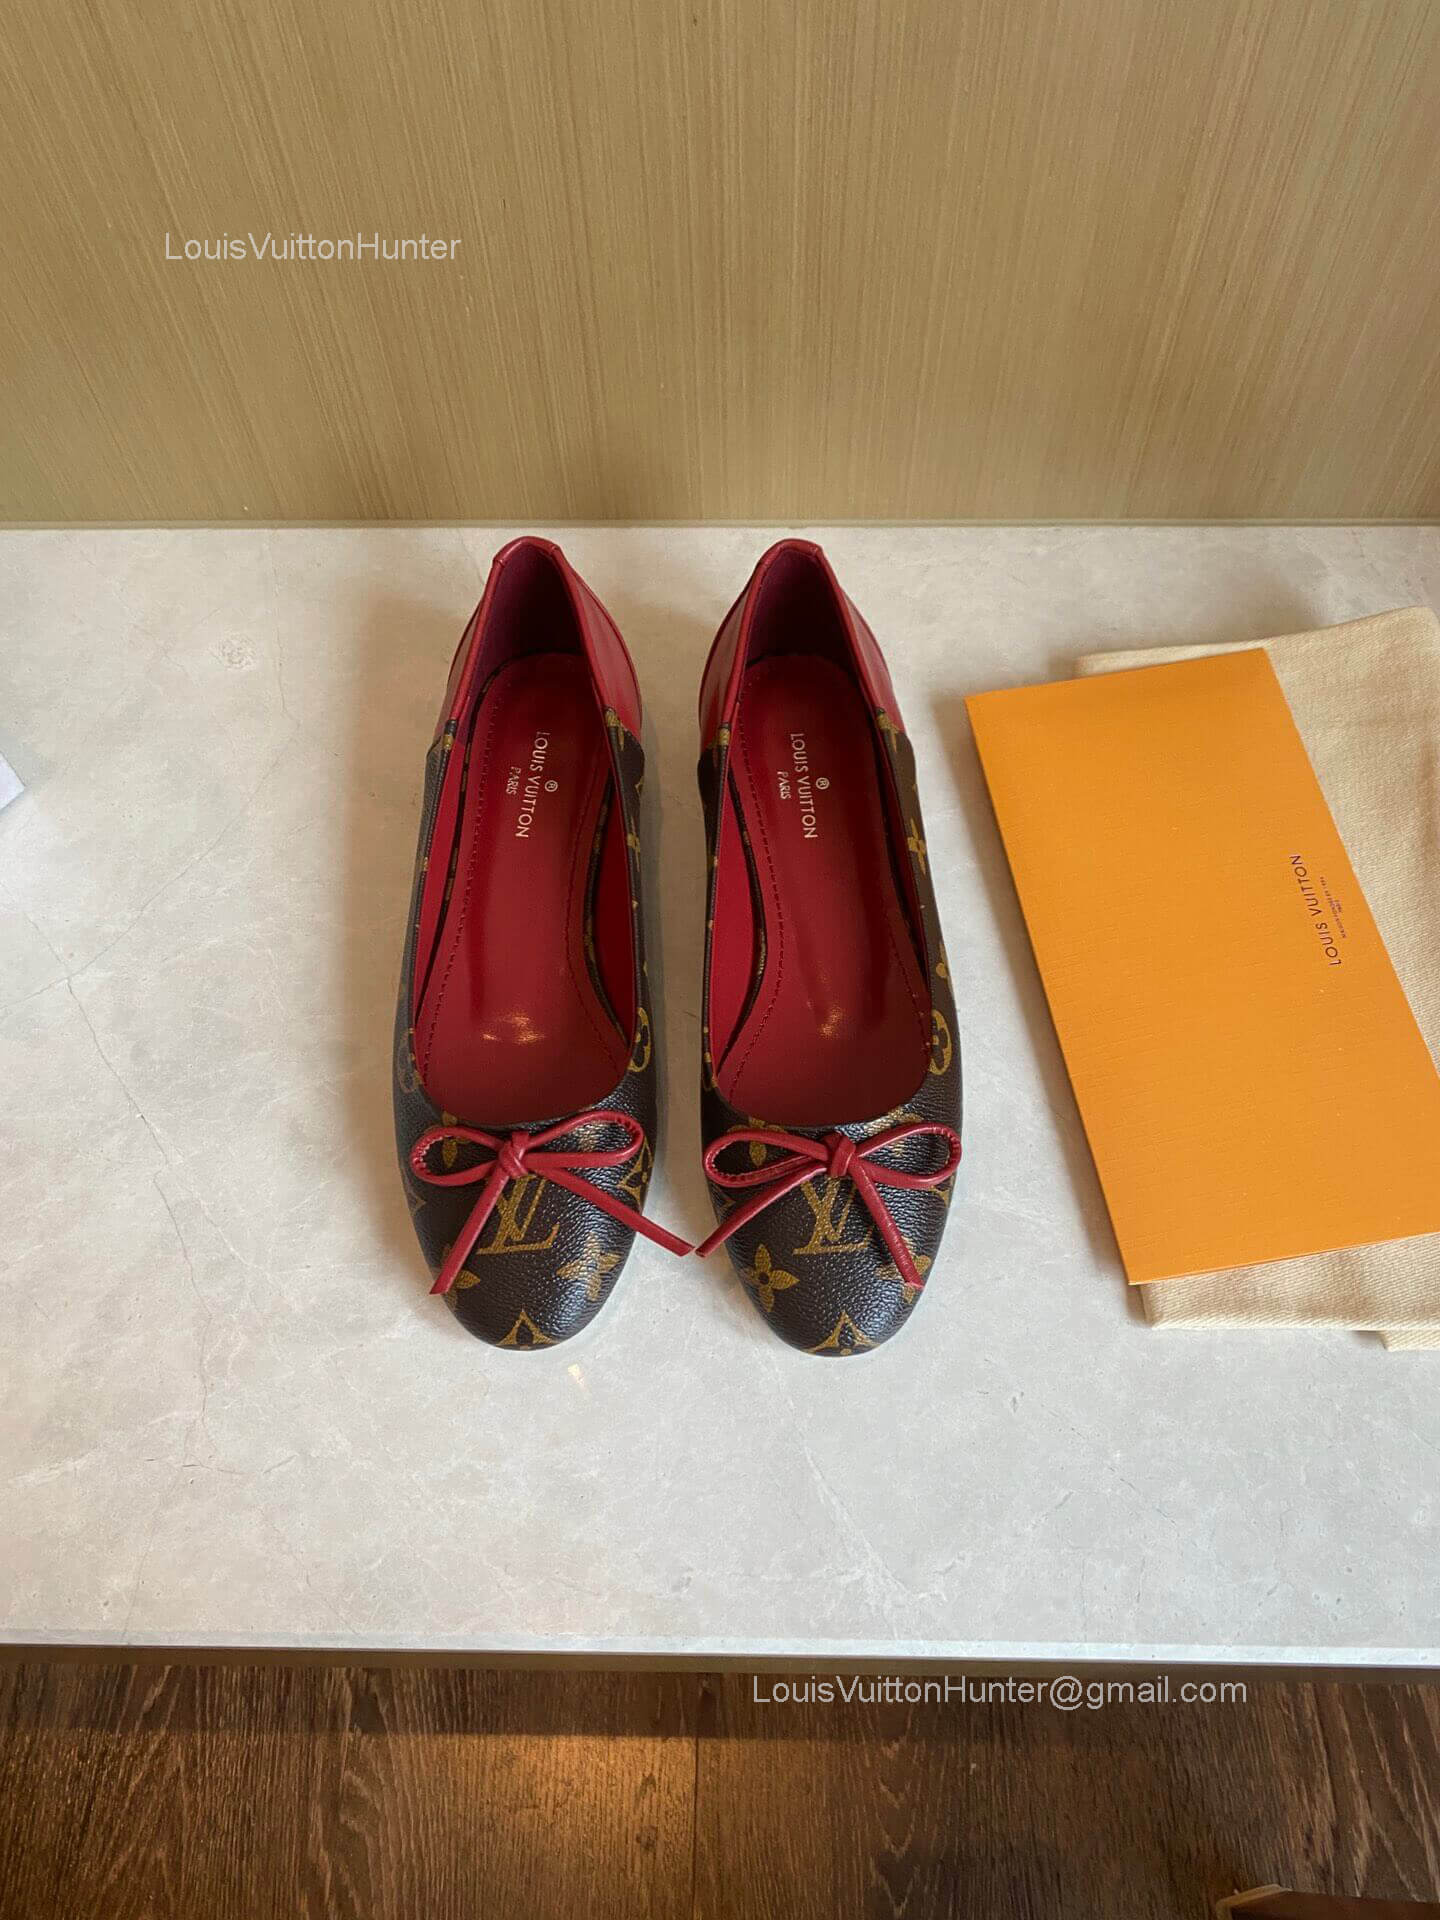 Louis Vuitton Joy Ballerina Flats in Red Leather and Monogram Canvas 2281741